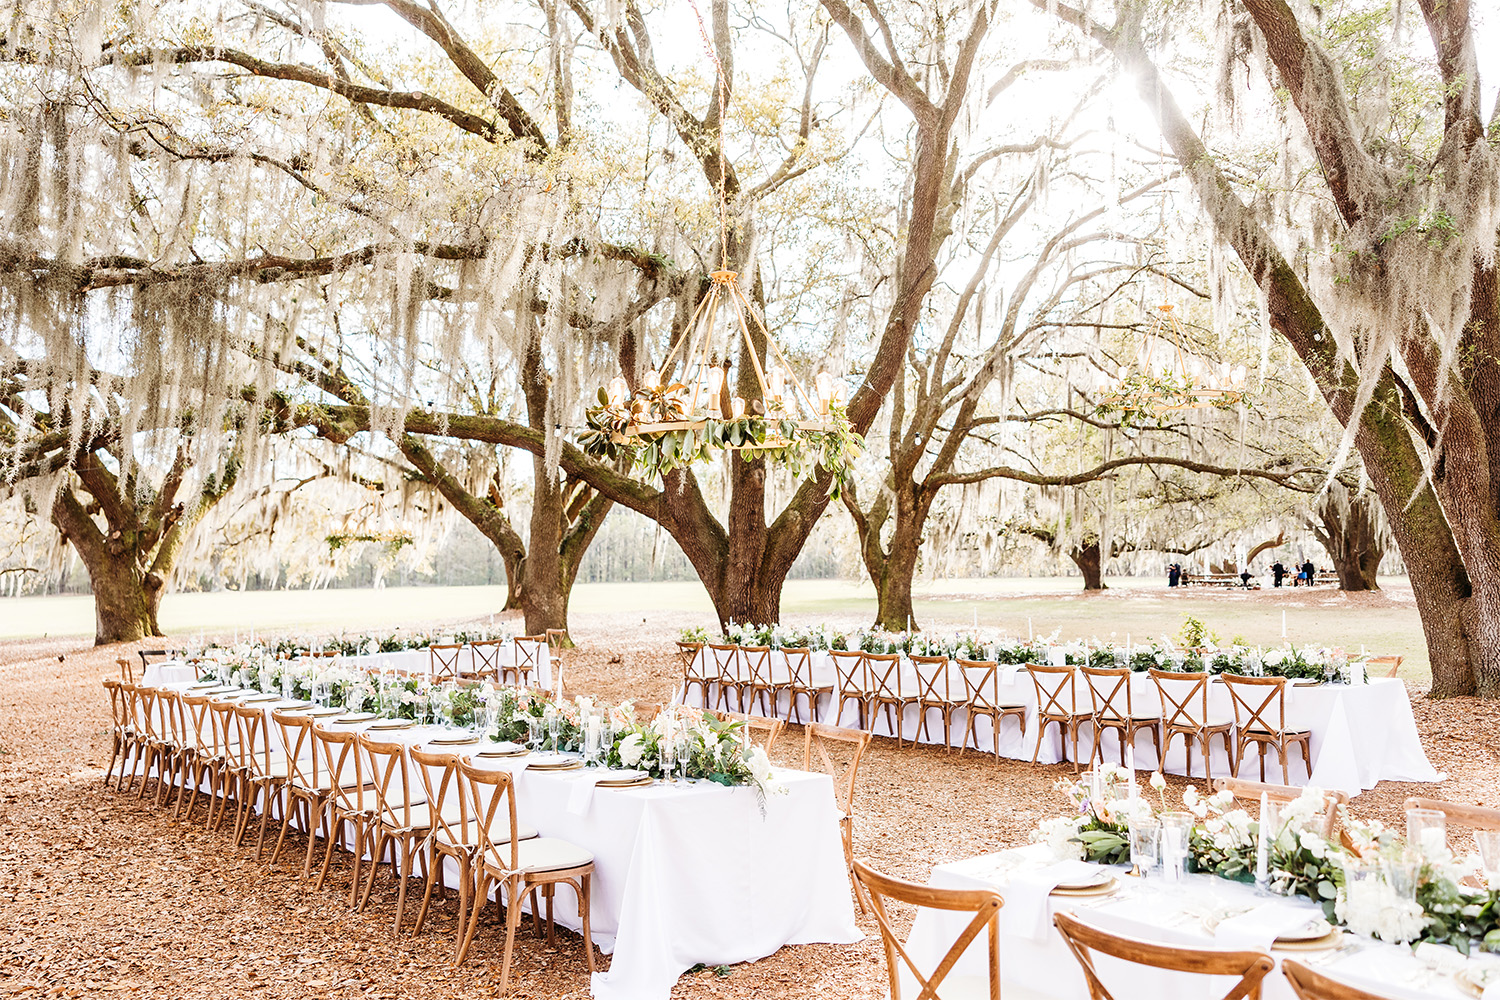 Outdoor venue with oak trees